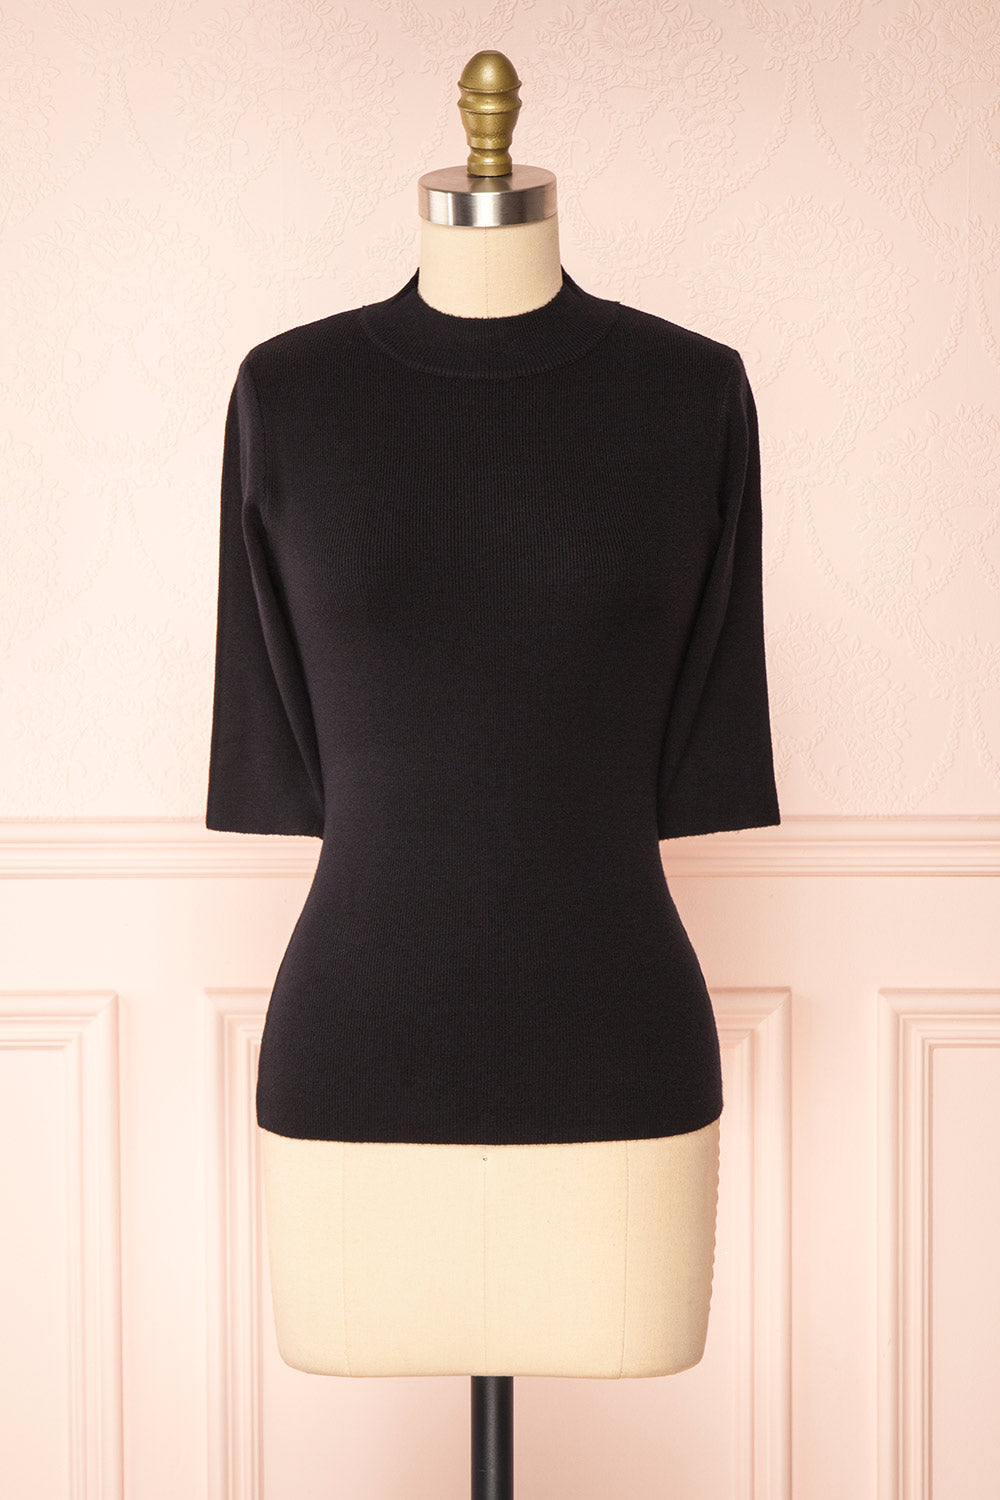 Nalleli Black Fitted Mock Top w/ Half Sleeves | Boutique 1861 front view